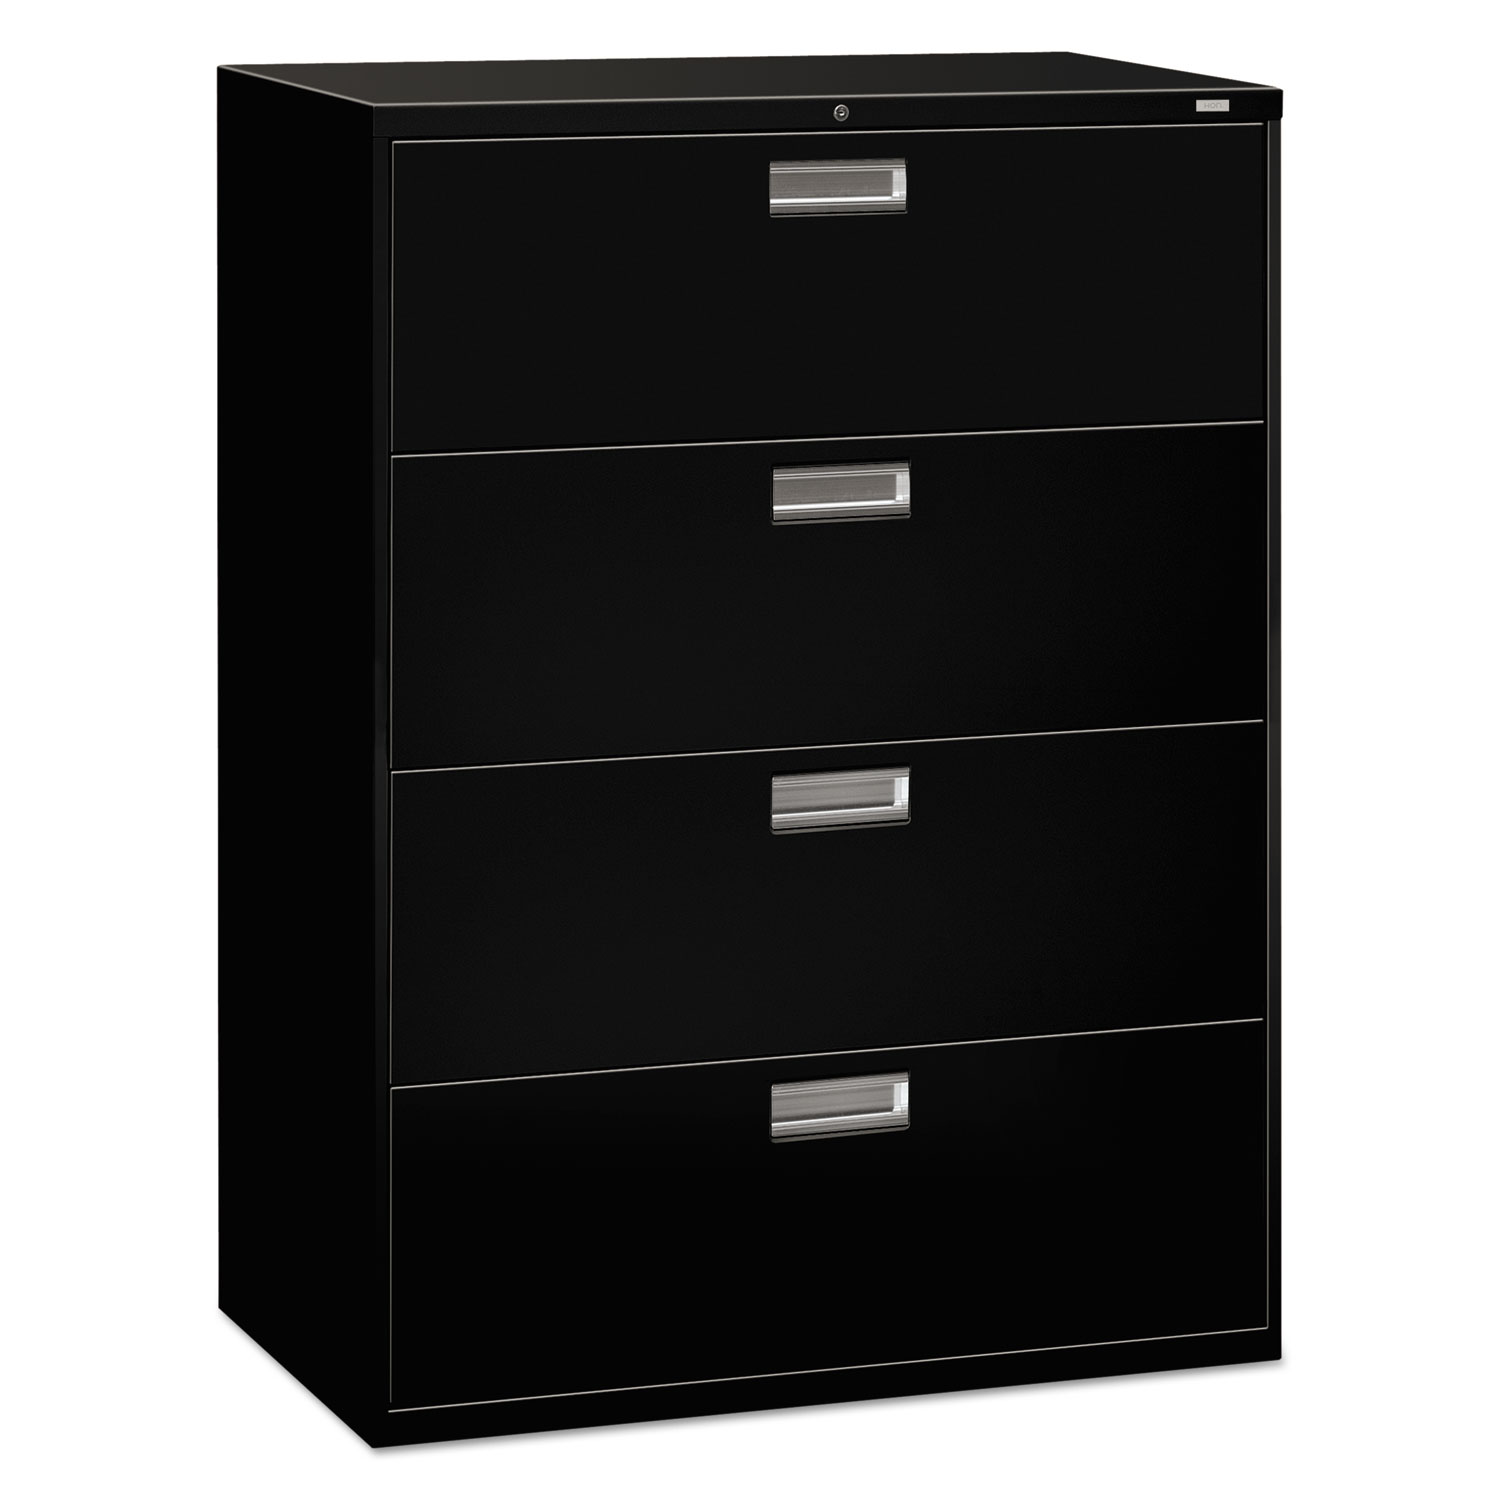 600 Series Four-Drawer Lateral File, 42w x 19-1/4d, Black